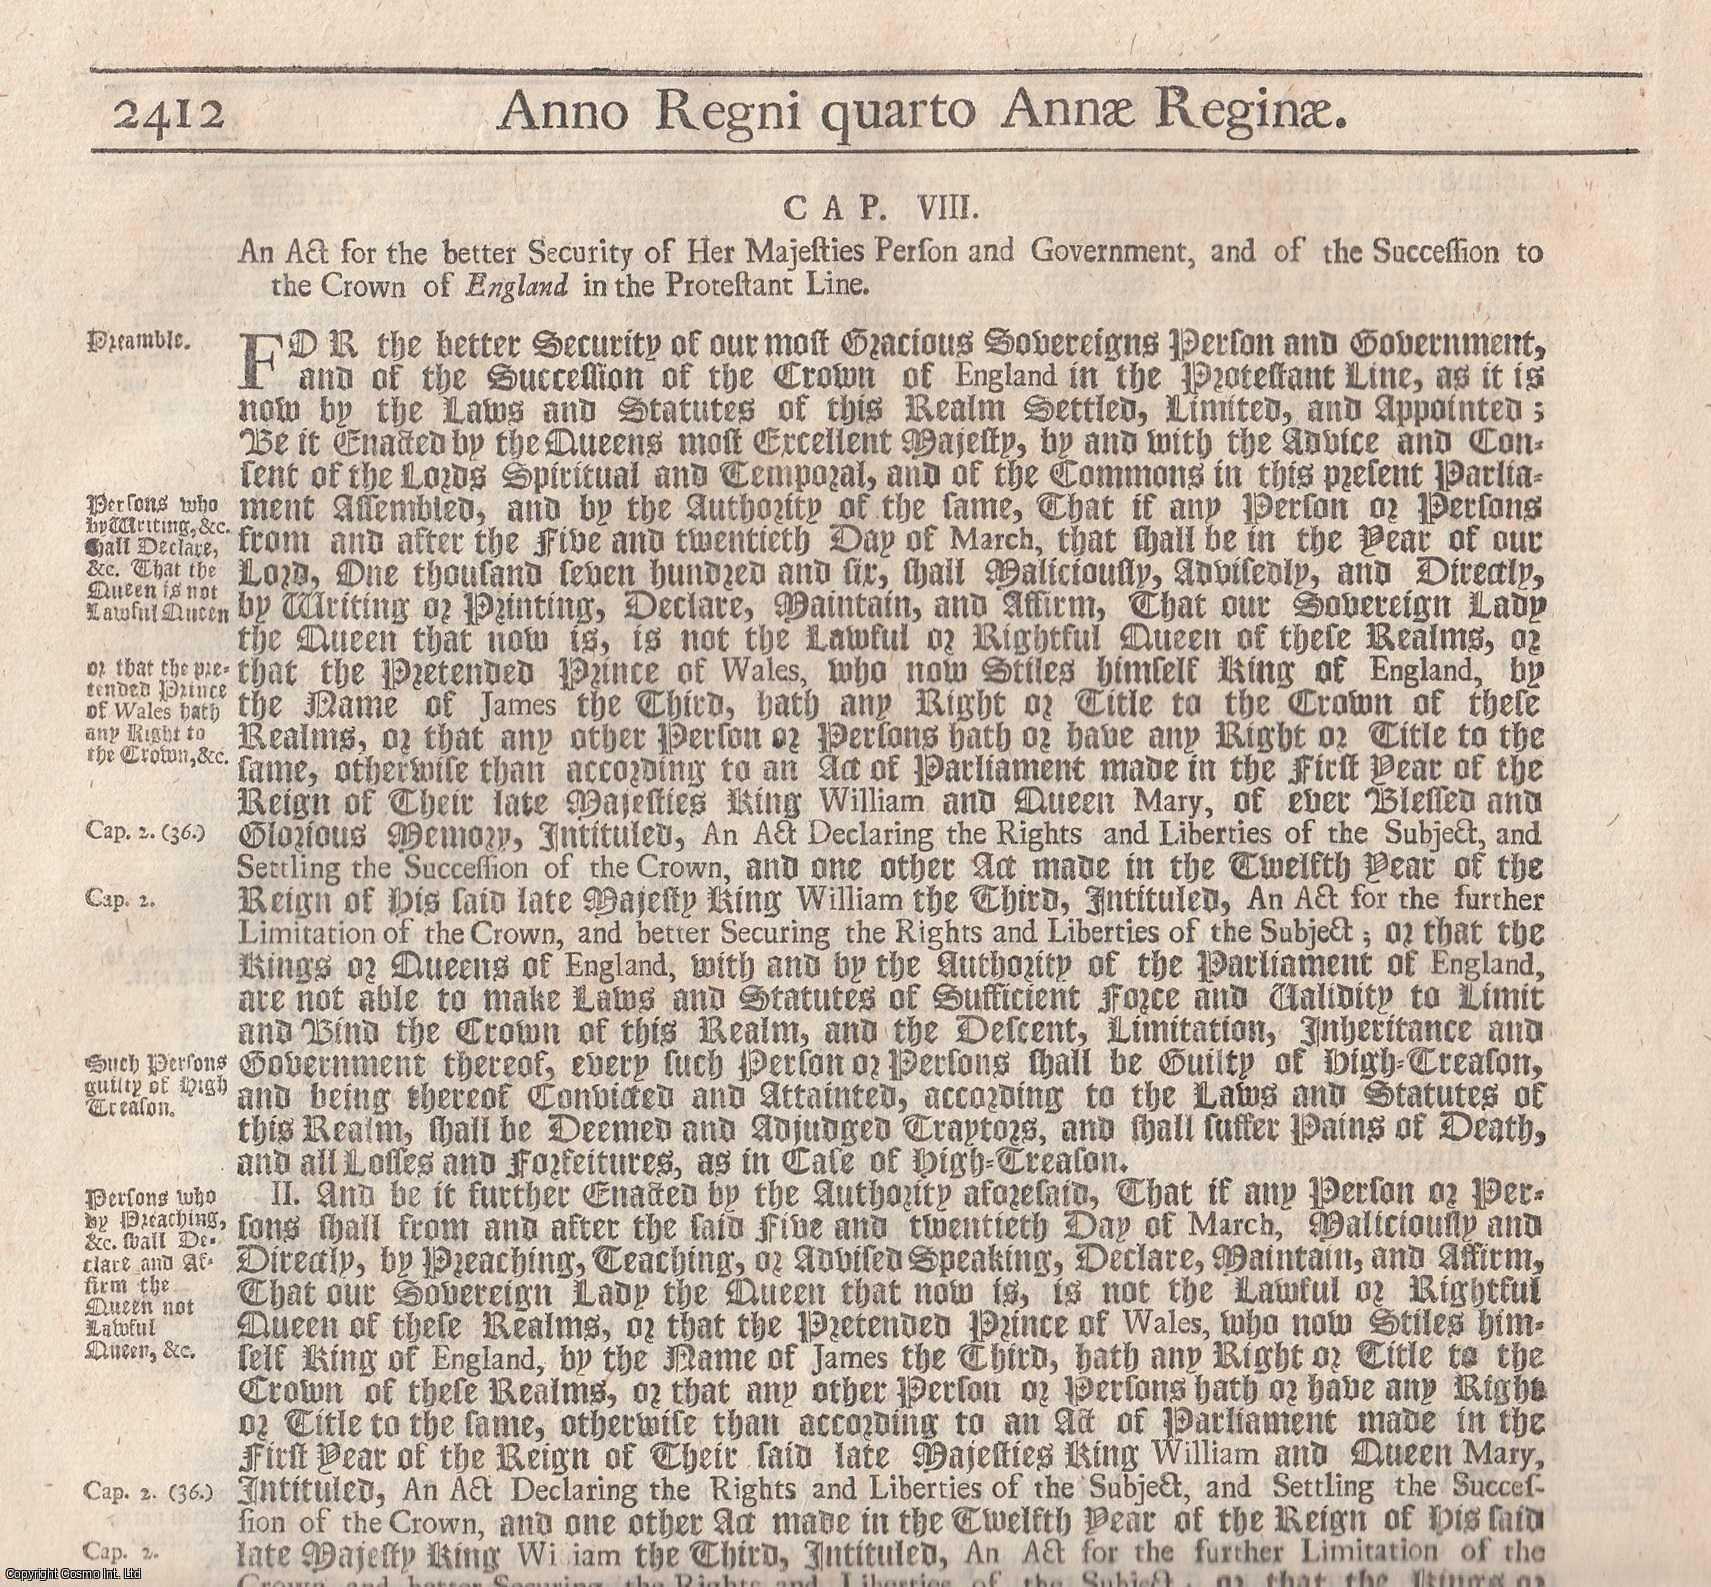 Queen Anne - c. 8. An Act for The Better Security of Her Majesties Person and Government, and of The Succession to The Crown of England in The Protestant Line, 1705.